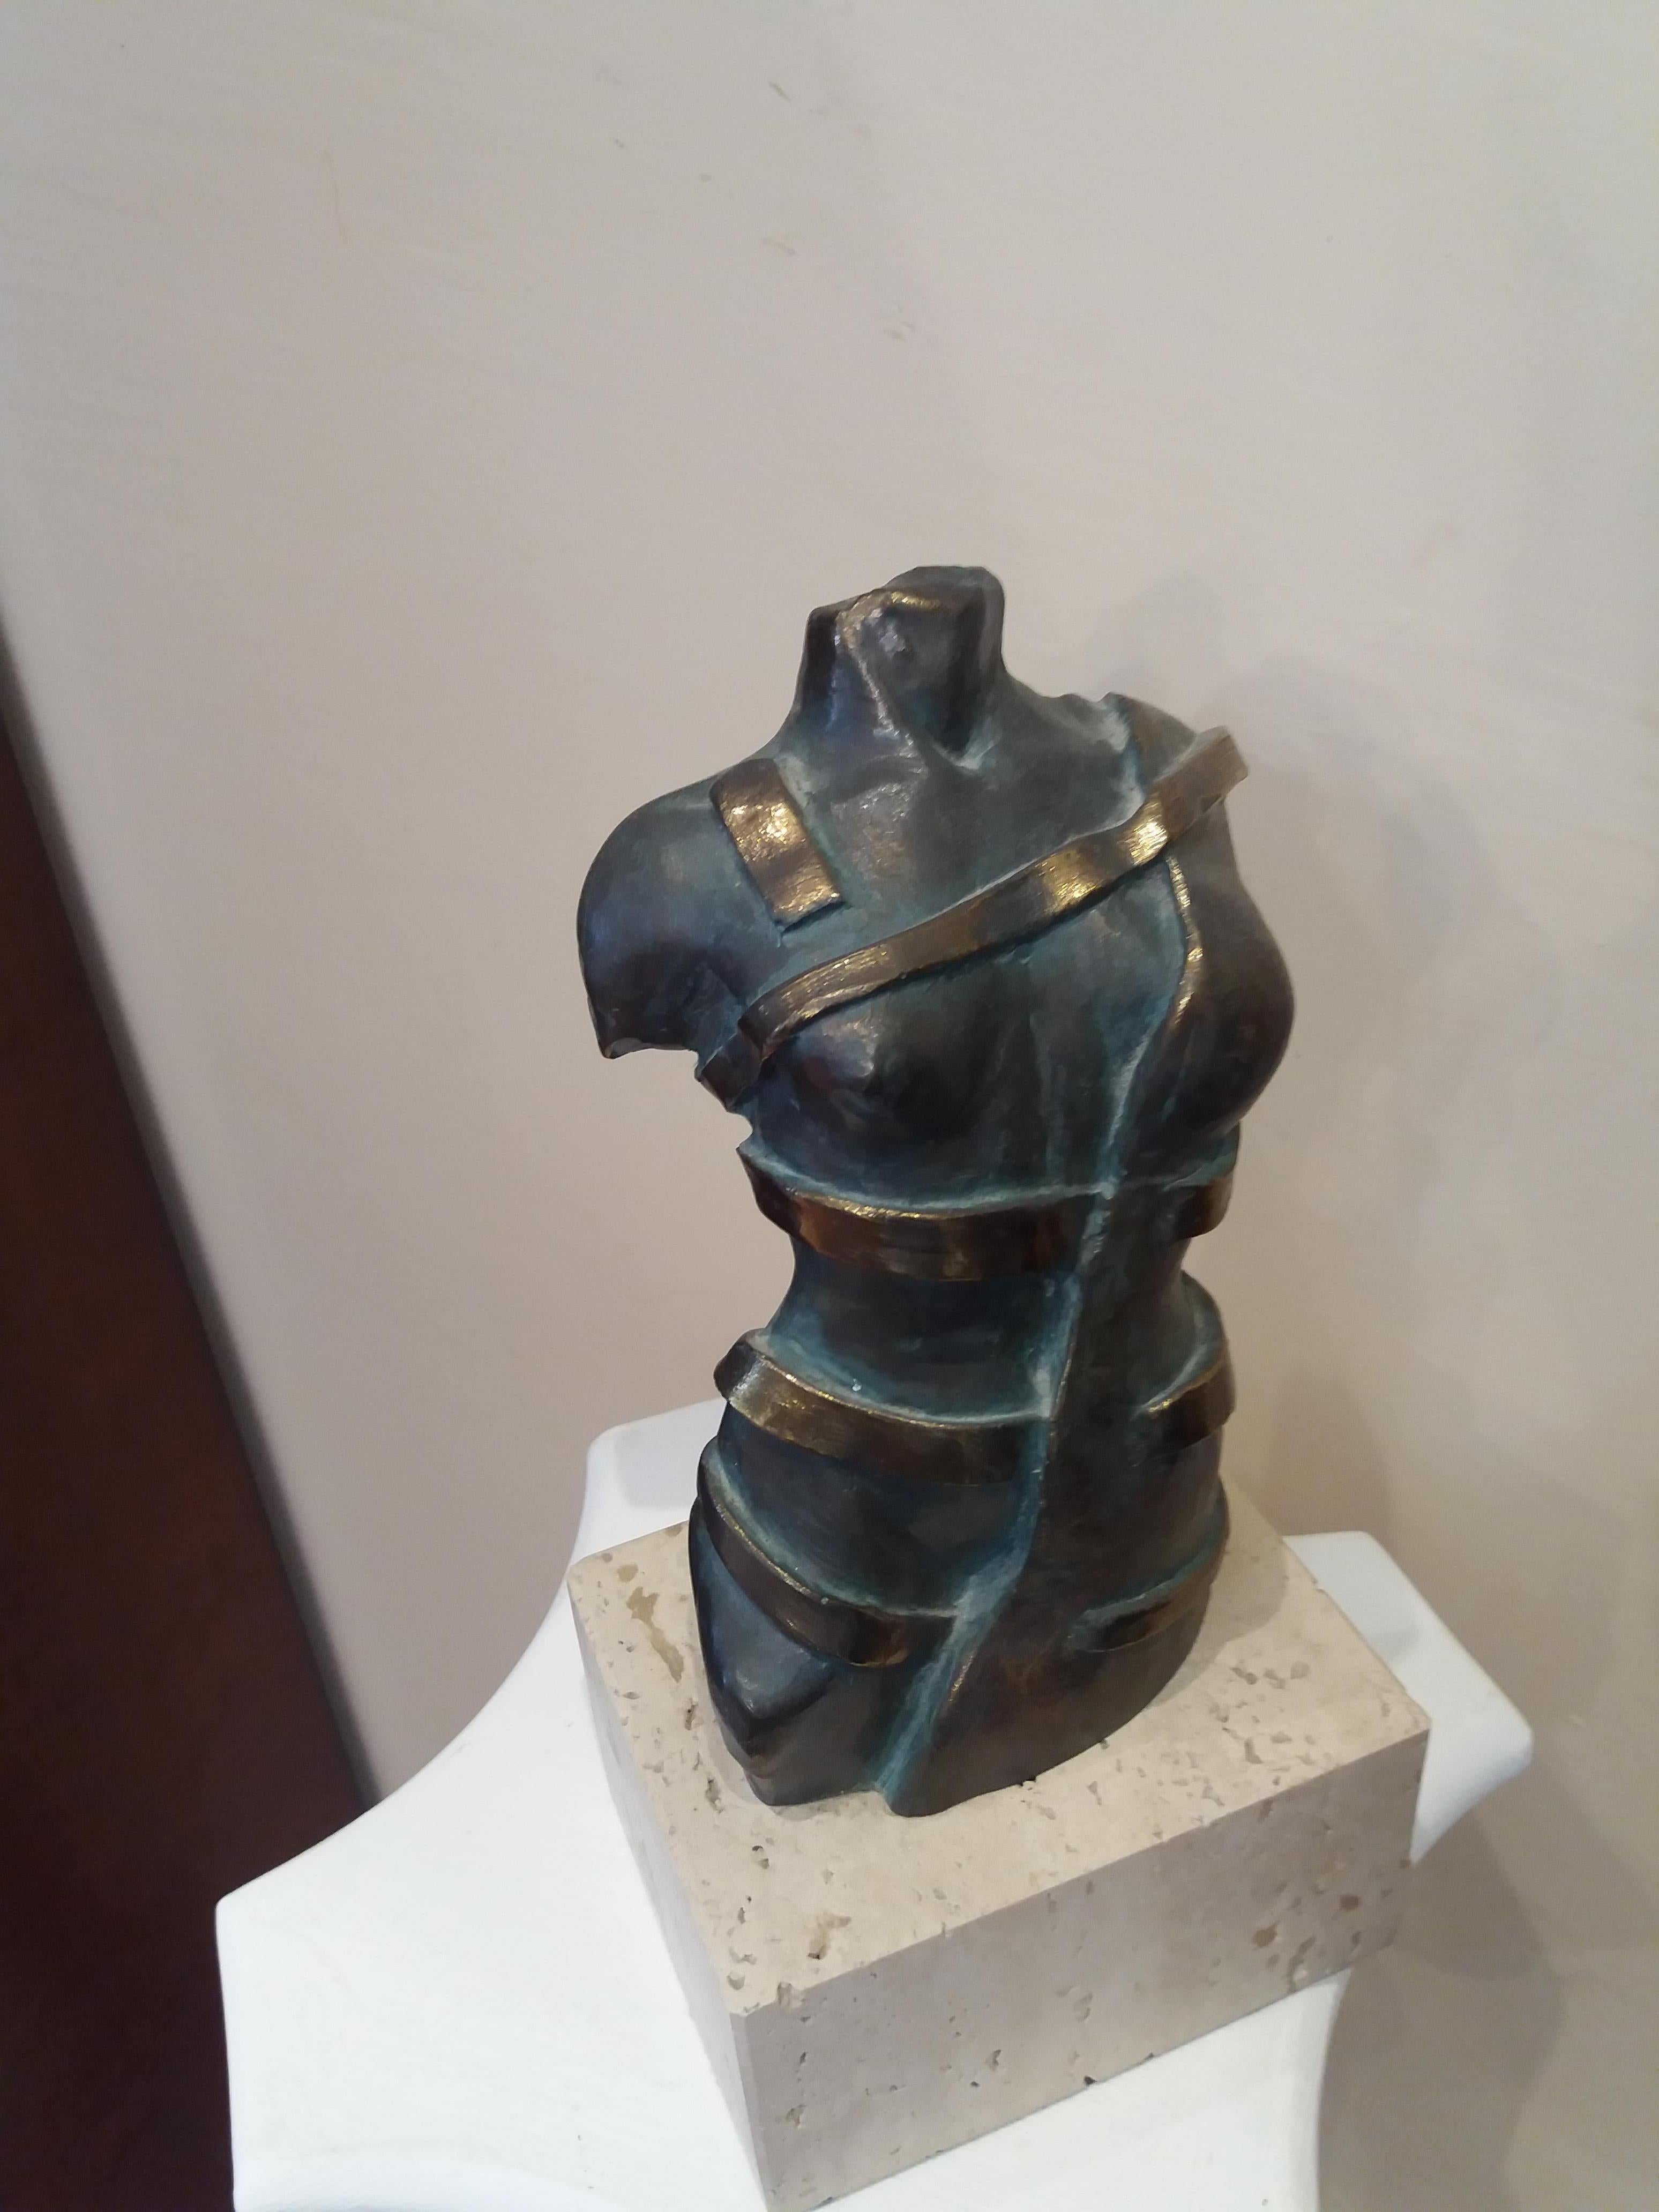 Torso. Original resin esculpture

Fili Plaza reflects in his work the emotional world of Mediterranean culture, with its sensuality and luminosity.

The nature of this universe offers you the basis to find the shapes and textures that best reflect